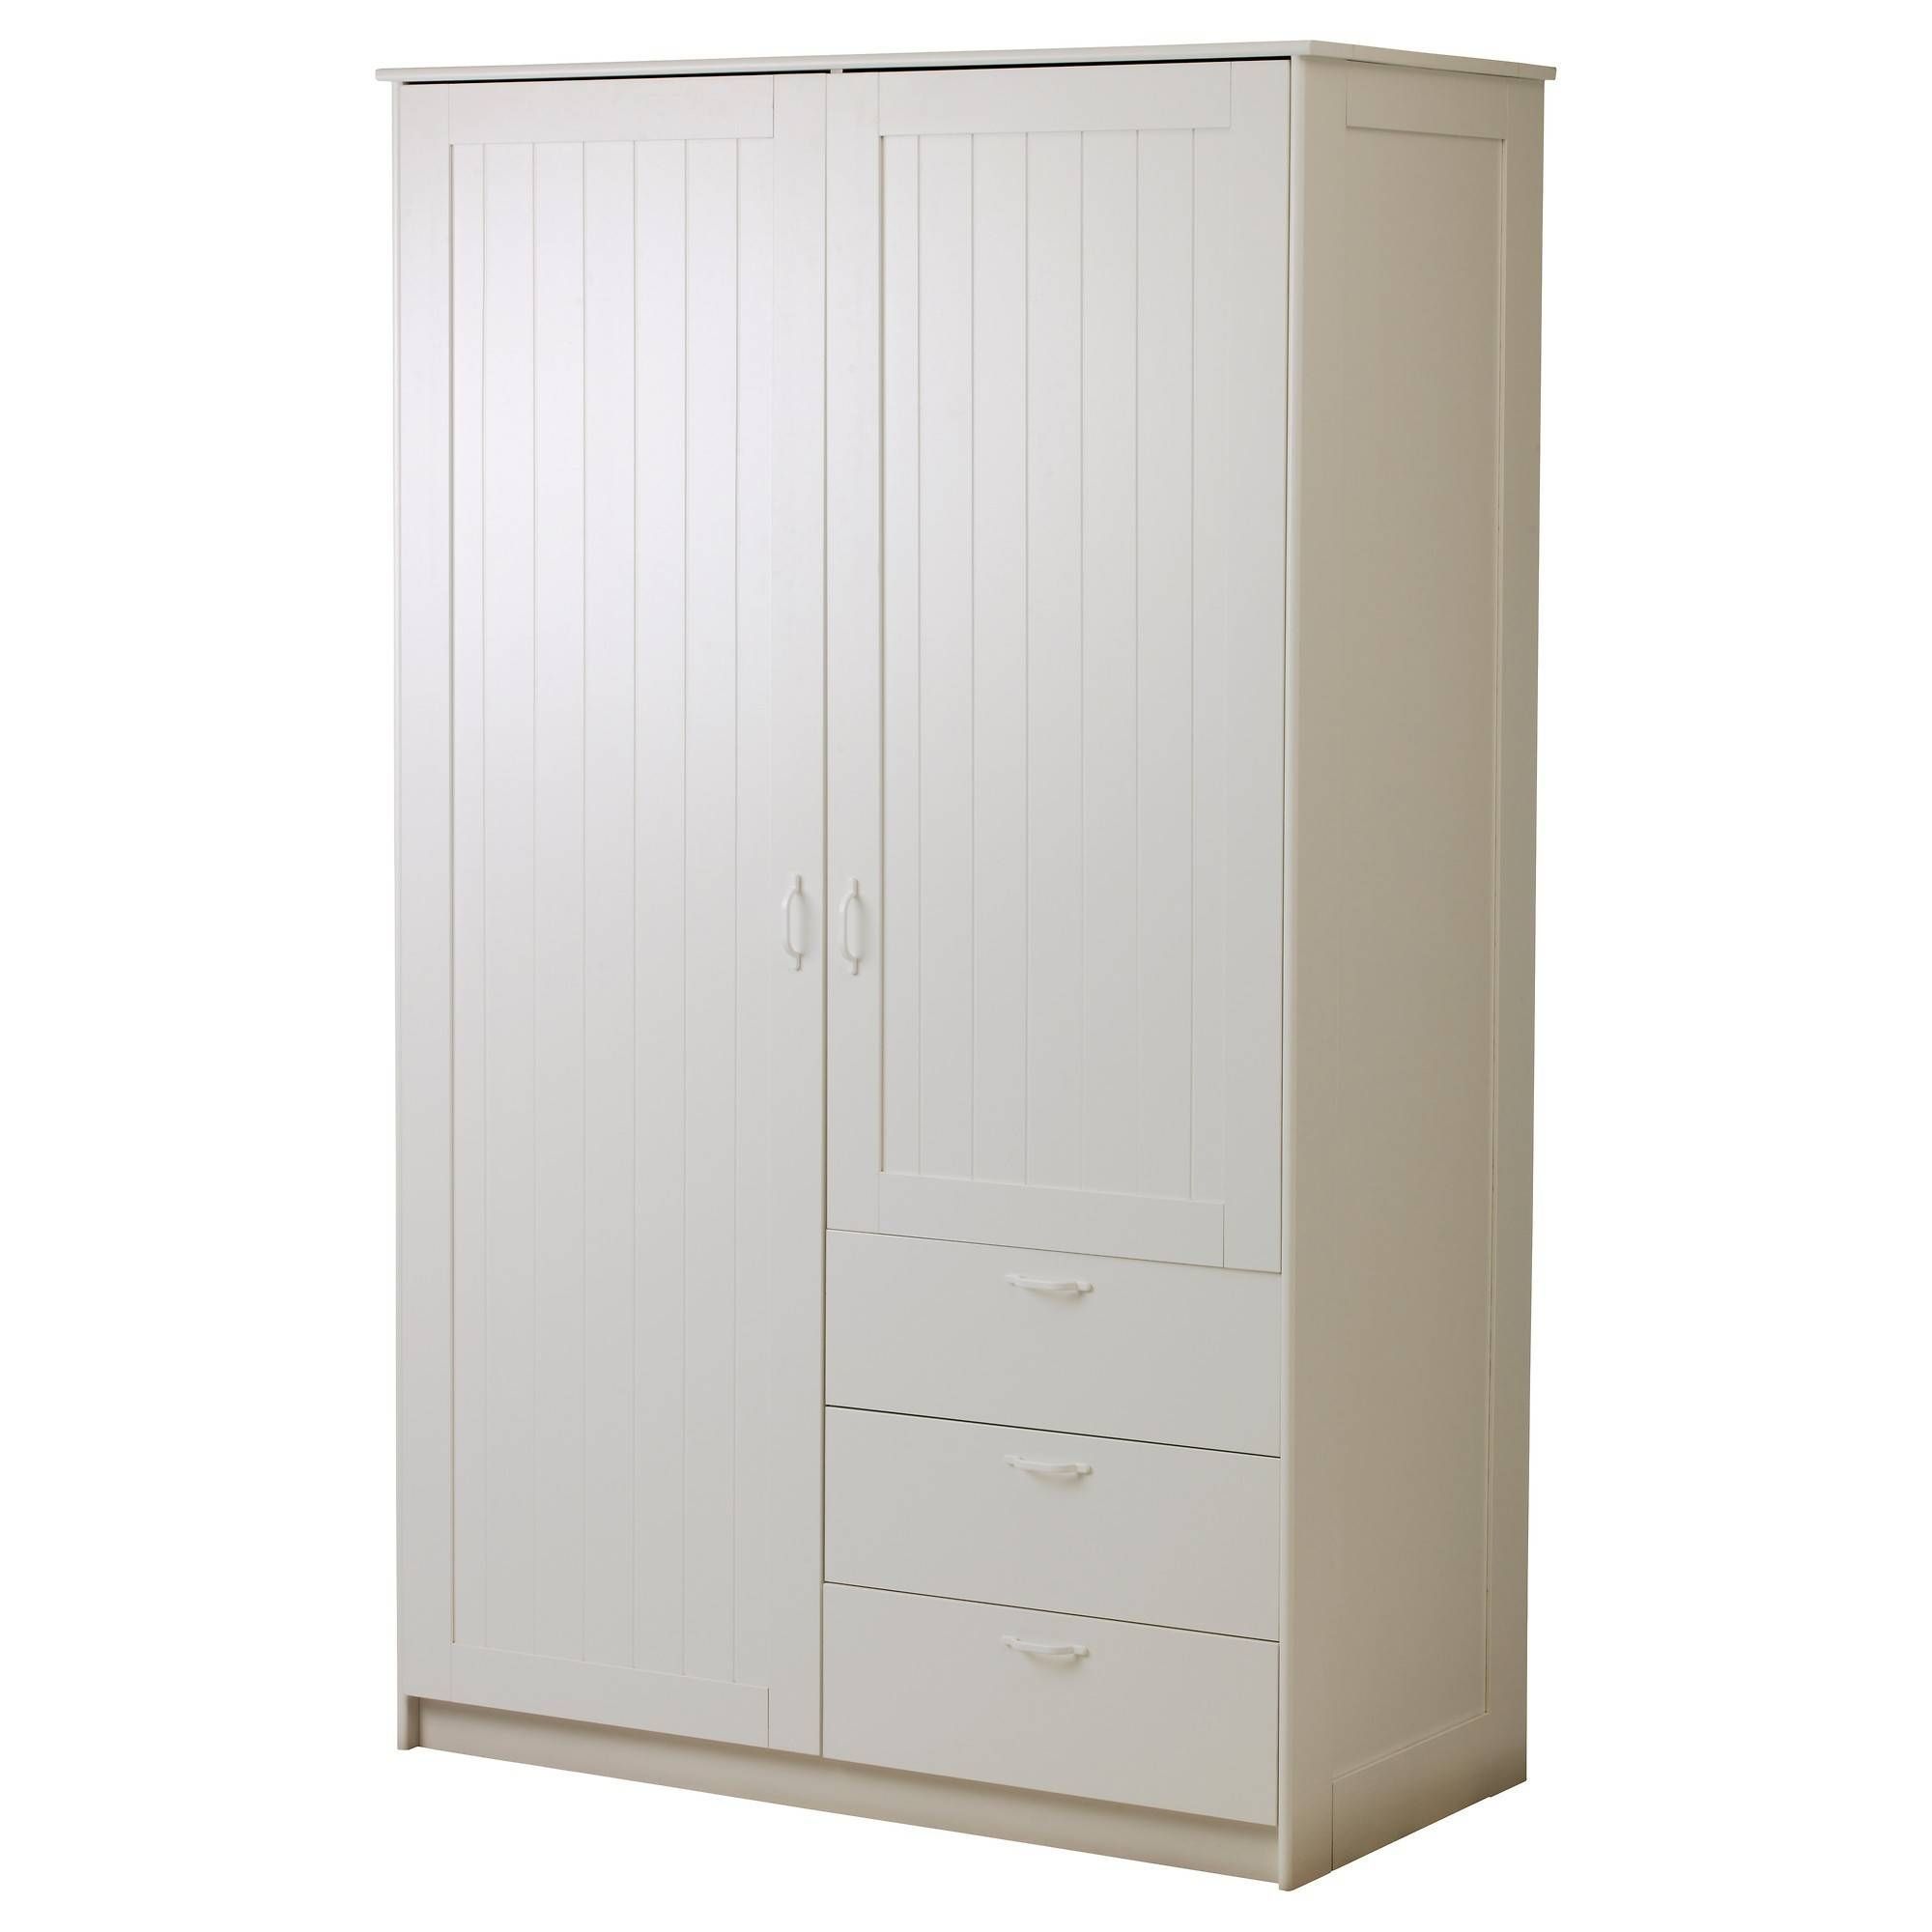 Furniture Bedroom Art Deco Solid White Painted Wooden Wardrobe For White Wood Wardrobes With Drawers (View 7 of 15)